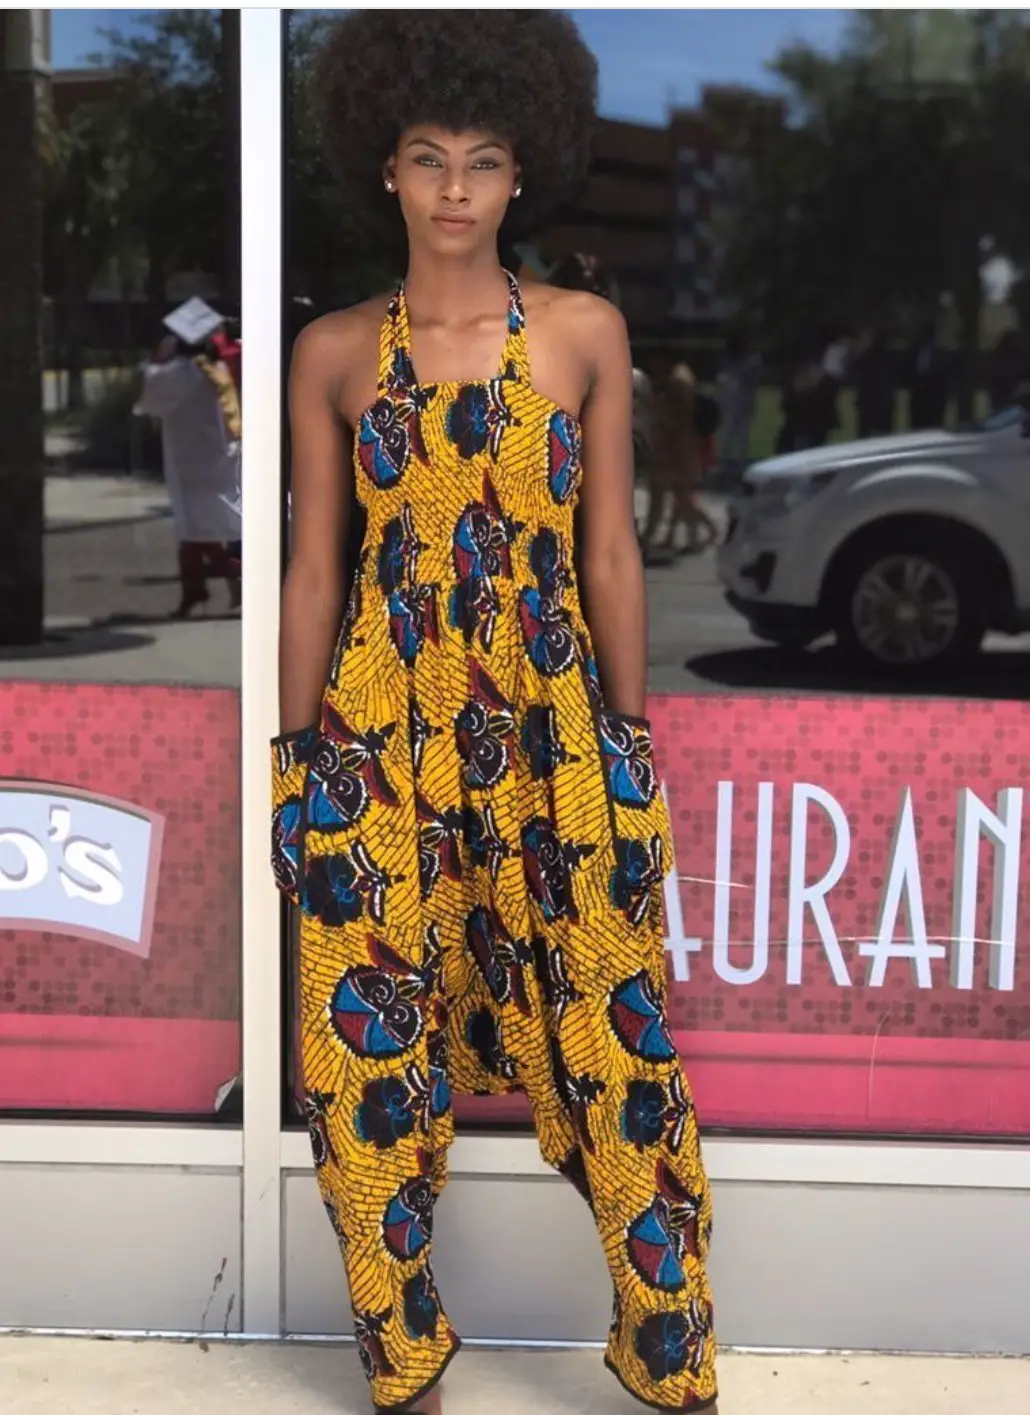 Very Stylish Ankara Dungarees That Are Trending